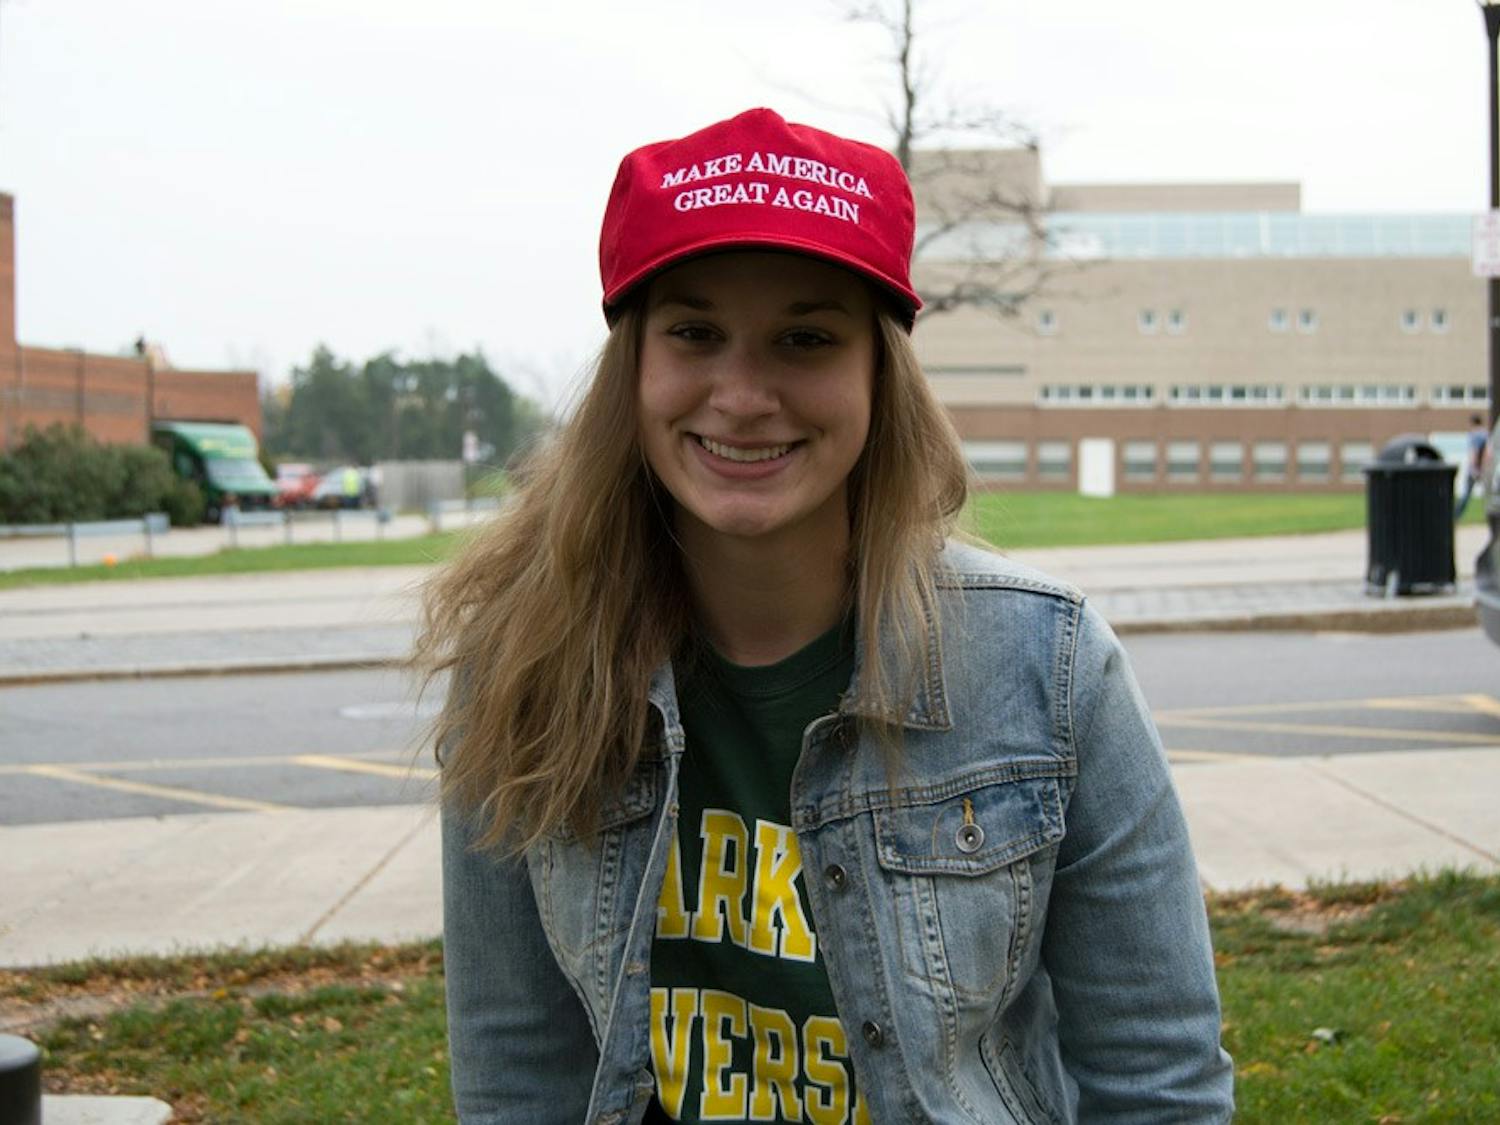 Jennie Gibson, a sophomore communication major, said she will be voting for Republican presidential candidate Donald Trump on Nov. 8. She said she will not dwell on Trump’s comments toward women but will focus on his platform.